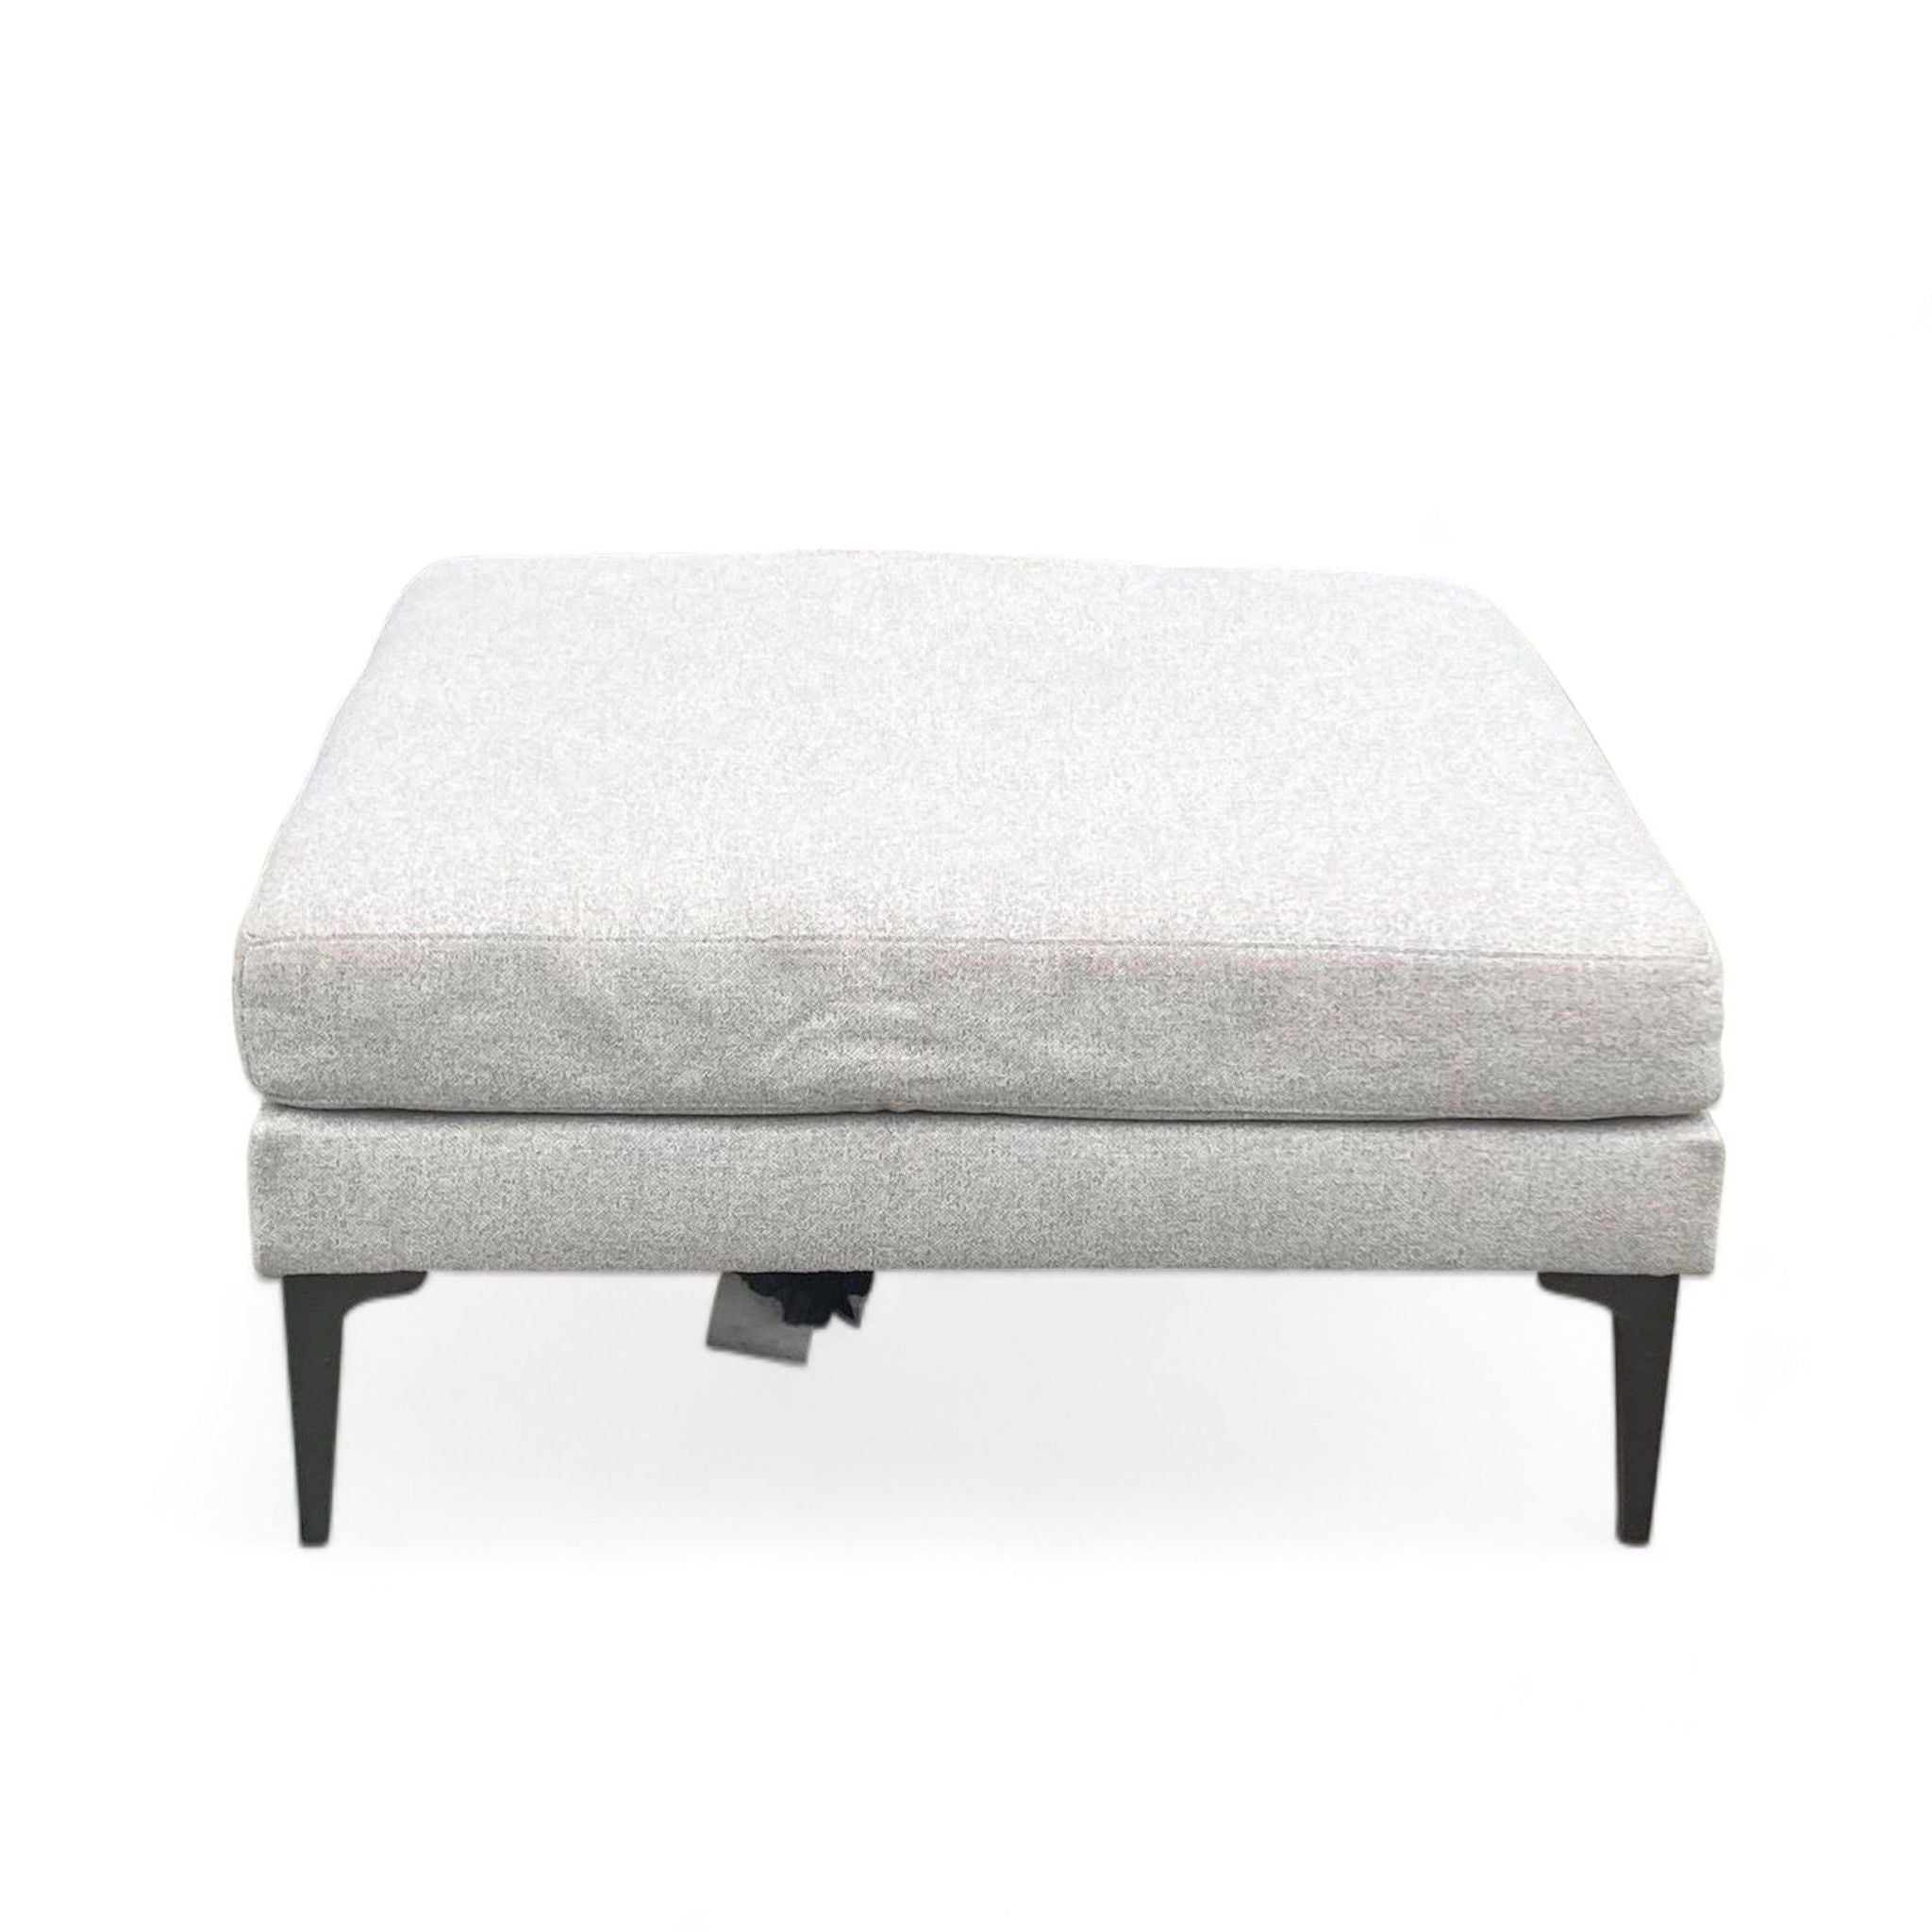 Silver grey chenille square ottoman by West Elm with dark pewter metal legs.